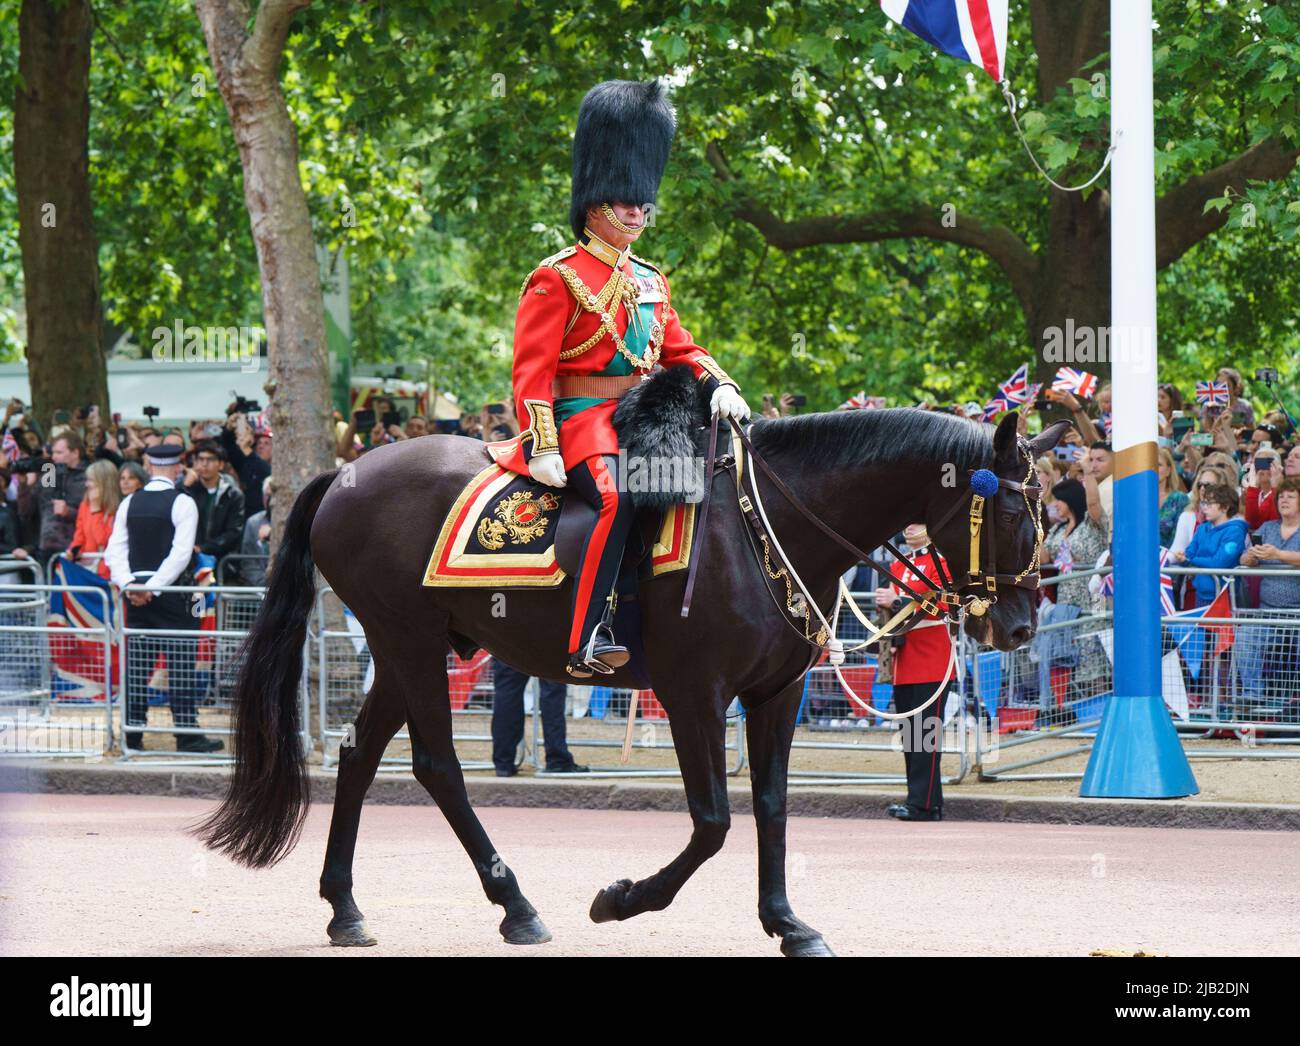 LONDON - JUNE 2: Prince Charles, the Prince of Wales, rides down The Mall, at the Trooping the Colour ceremony on June 2, 2022 in central London. Photo by David Levenson Credit: David Levenson/Alamy Live News Stock Photo